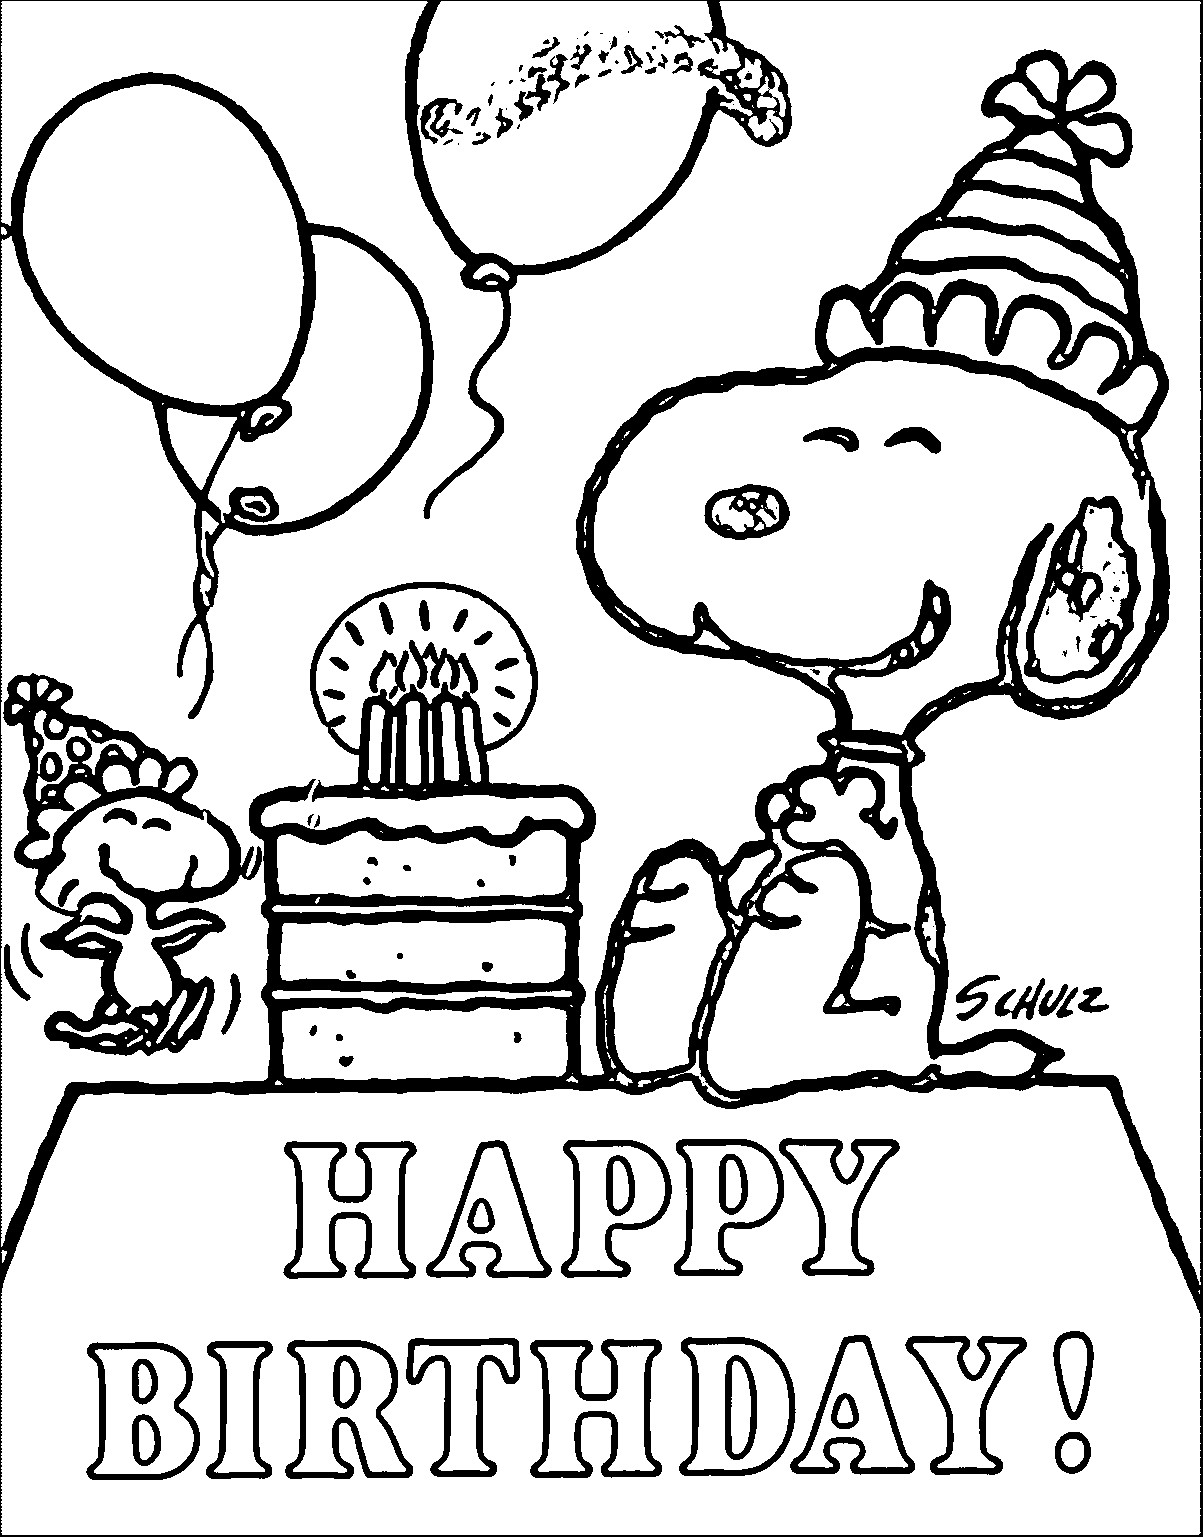 Printable Happy Birthday Coloring Pages
 Snoopy Happy Birthday Quote Coloring Page